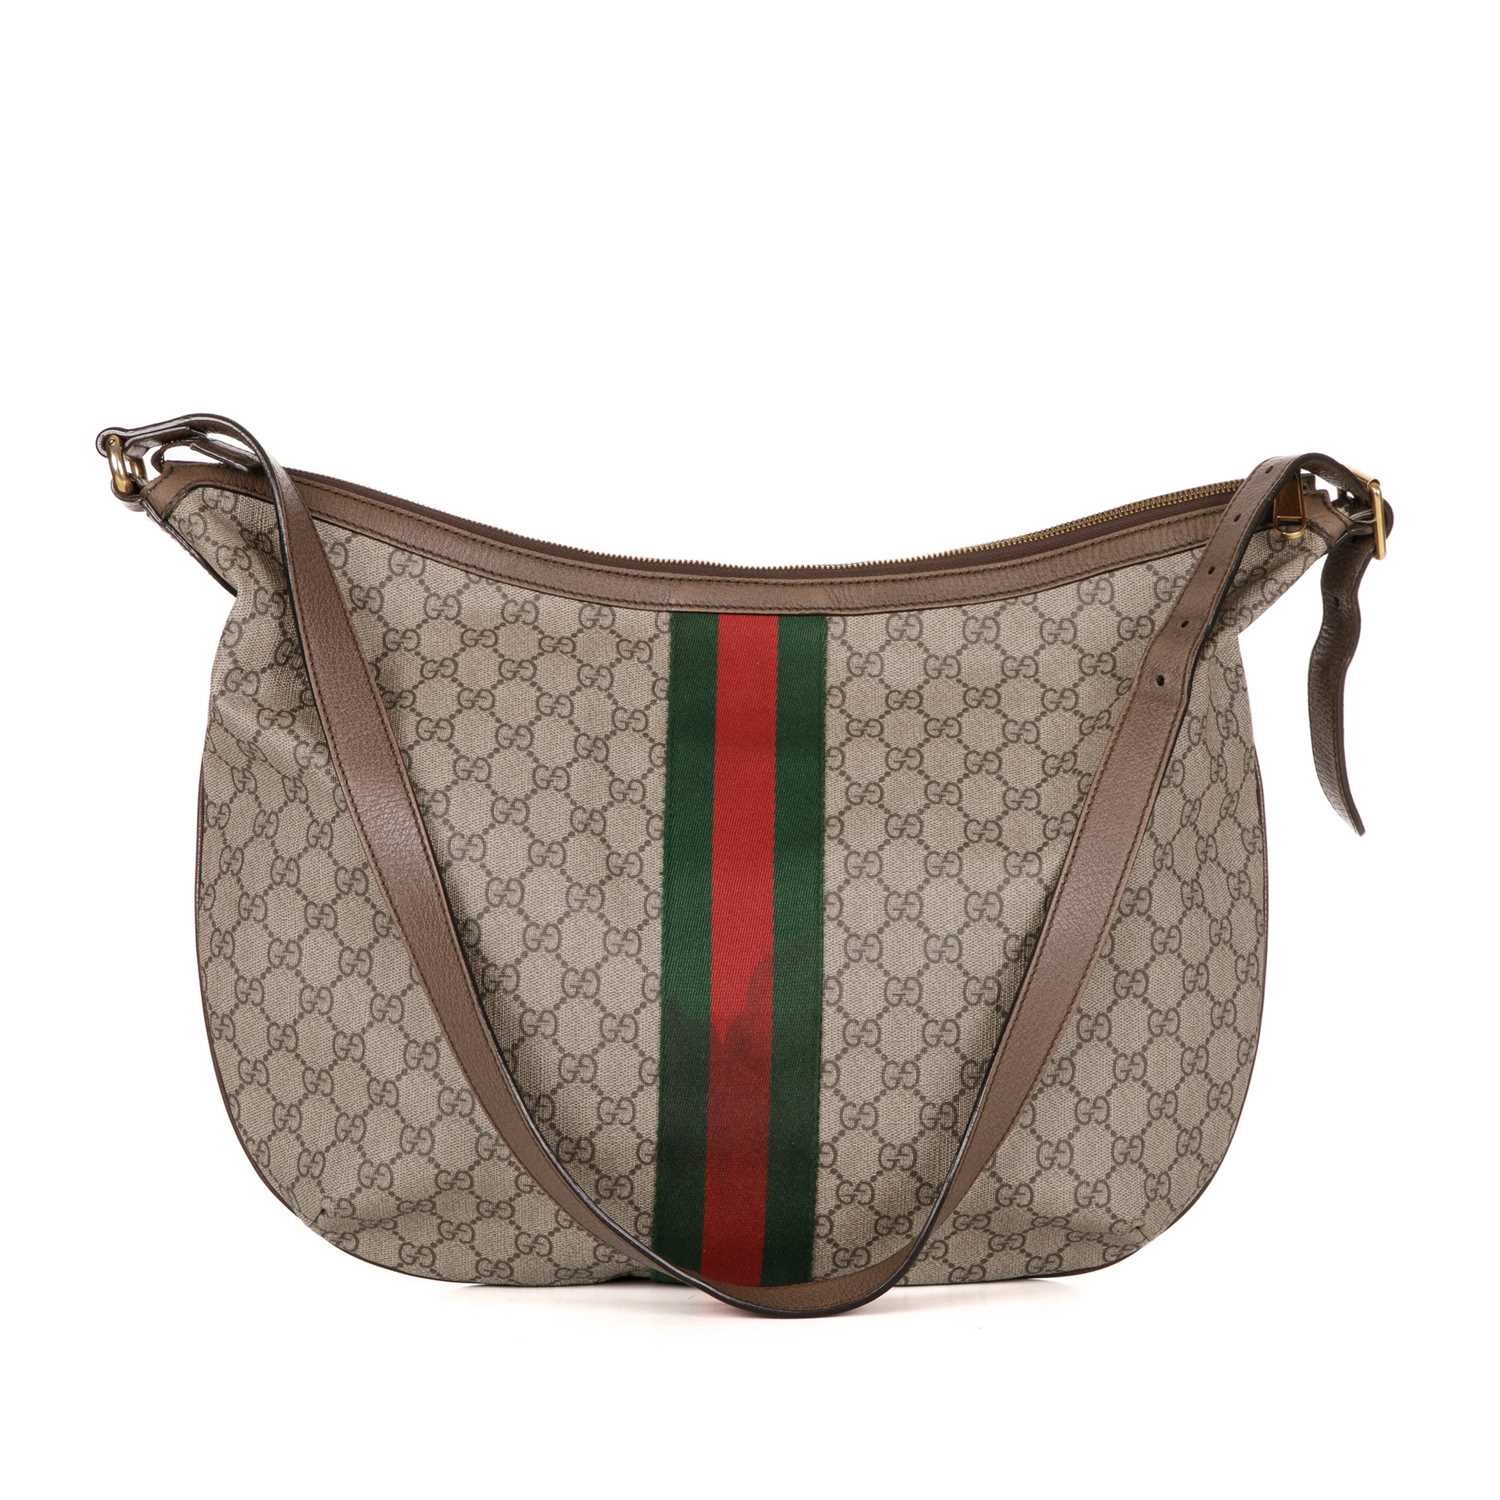 Gucci, a large Ophidia Web hobo handbag, crafted from the maker's supreme GG coated canvas, with - Image 2 of 3